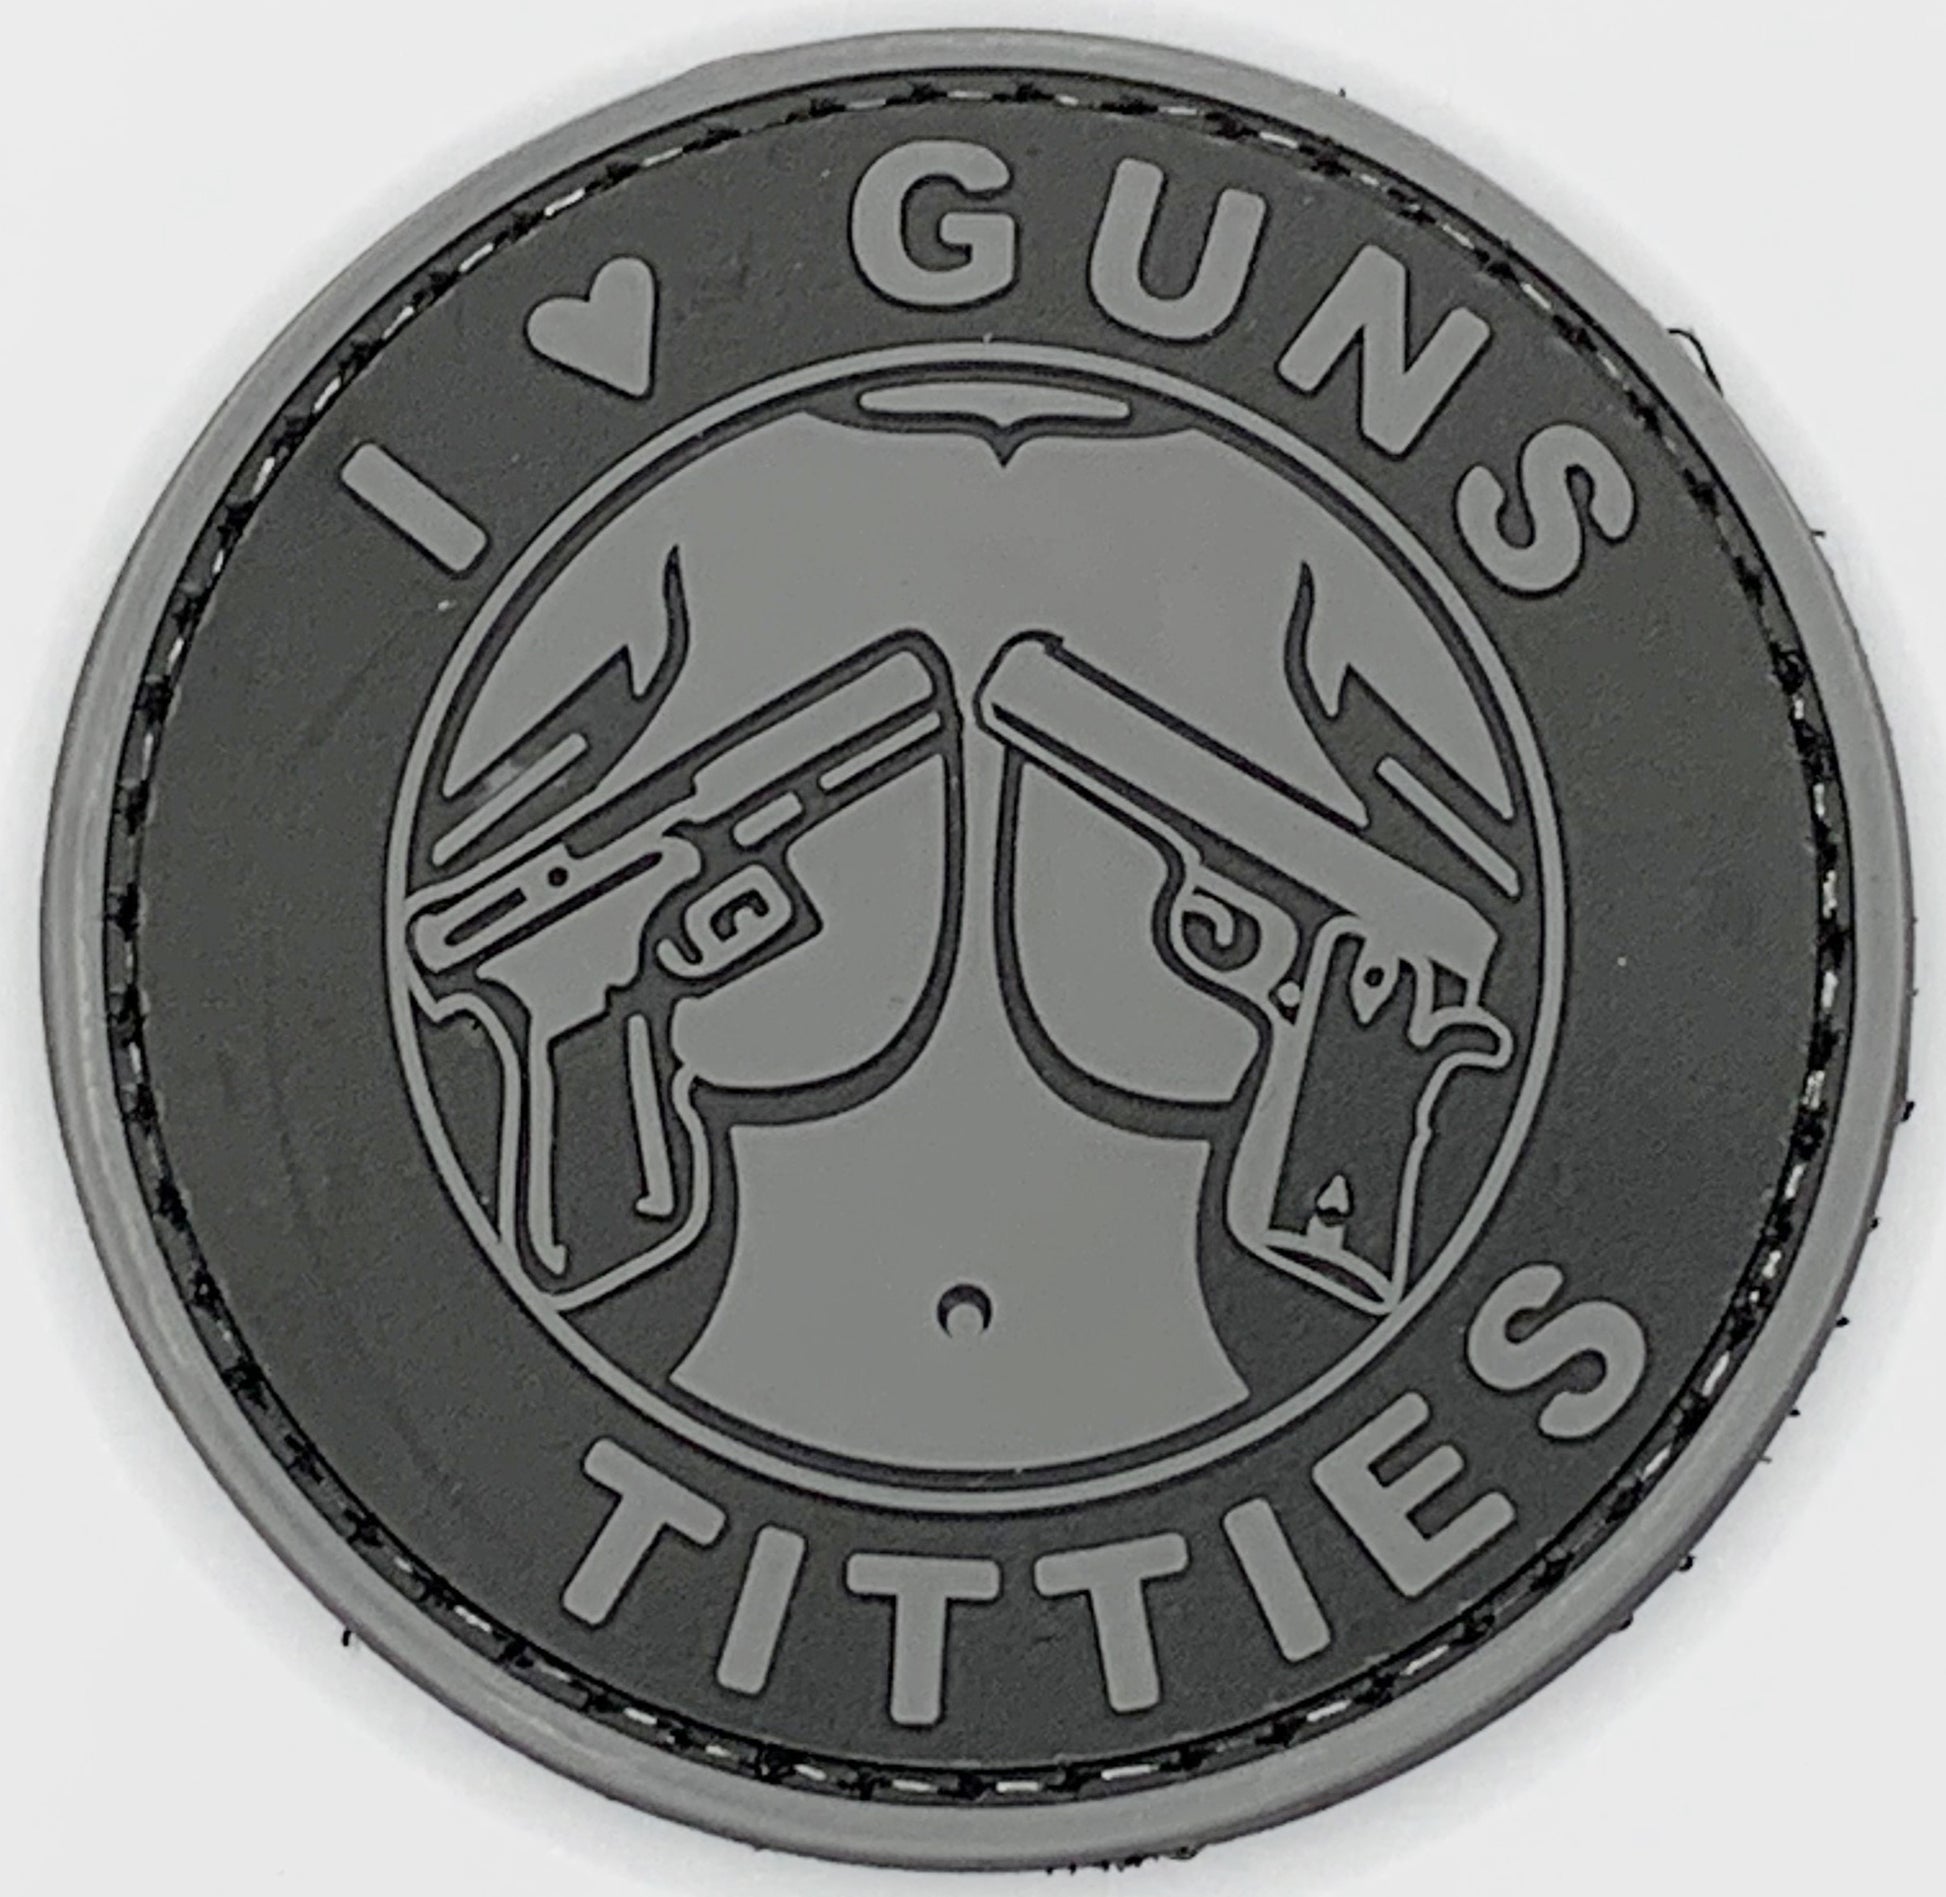 I Love Guns and T*tties PVC Morale Patch – Extreme Airsoft RI